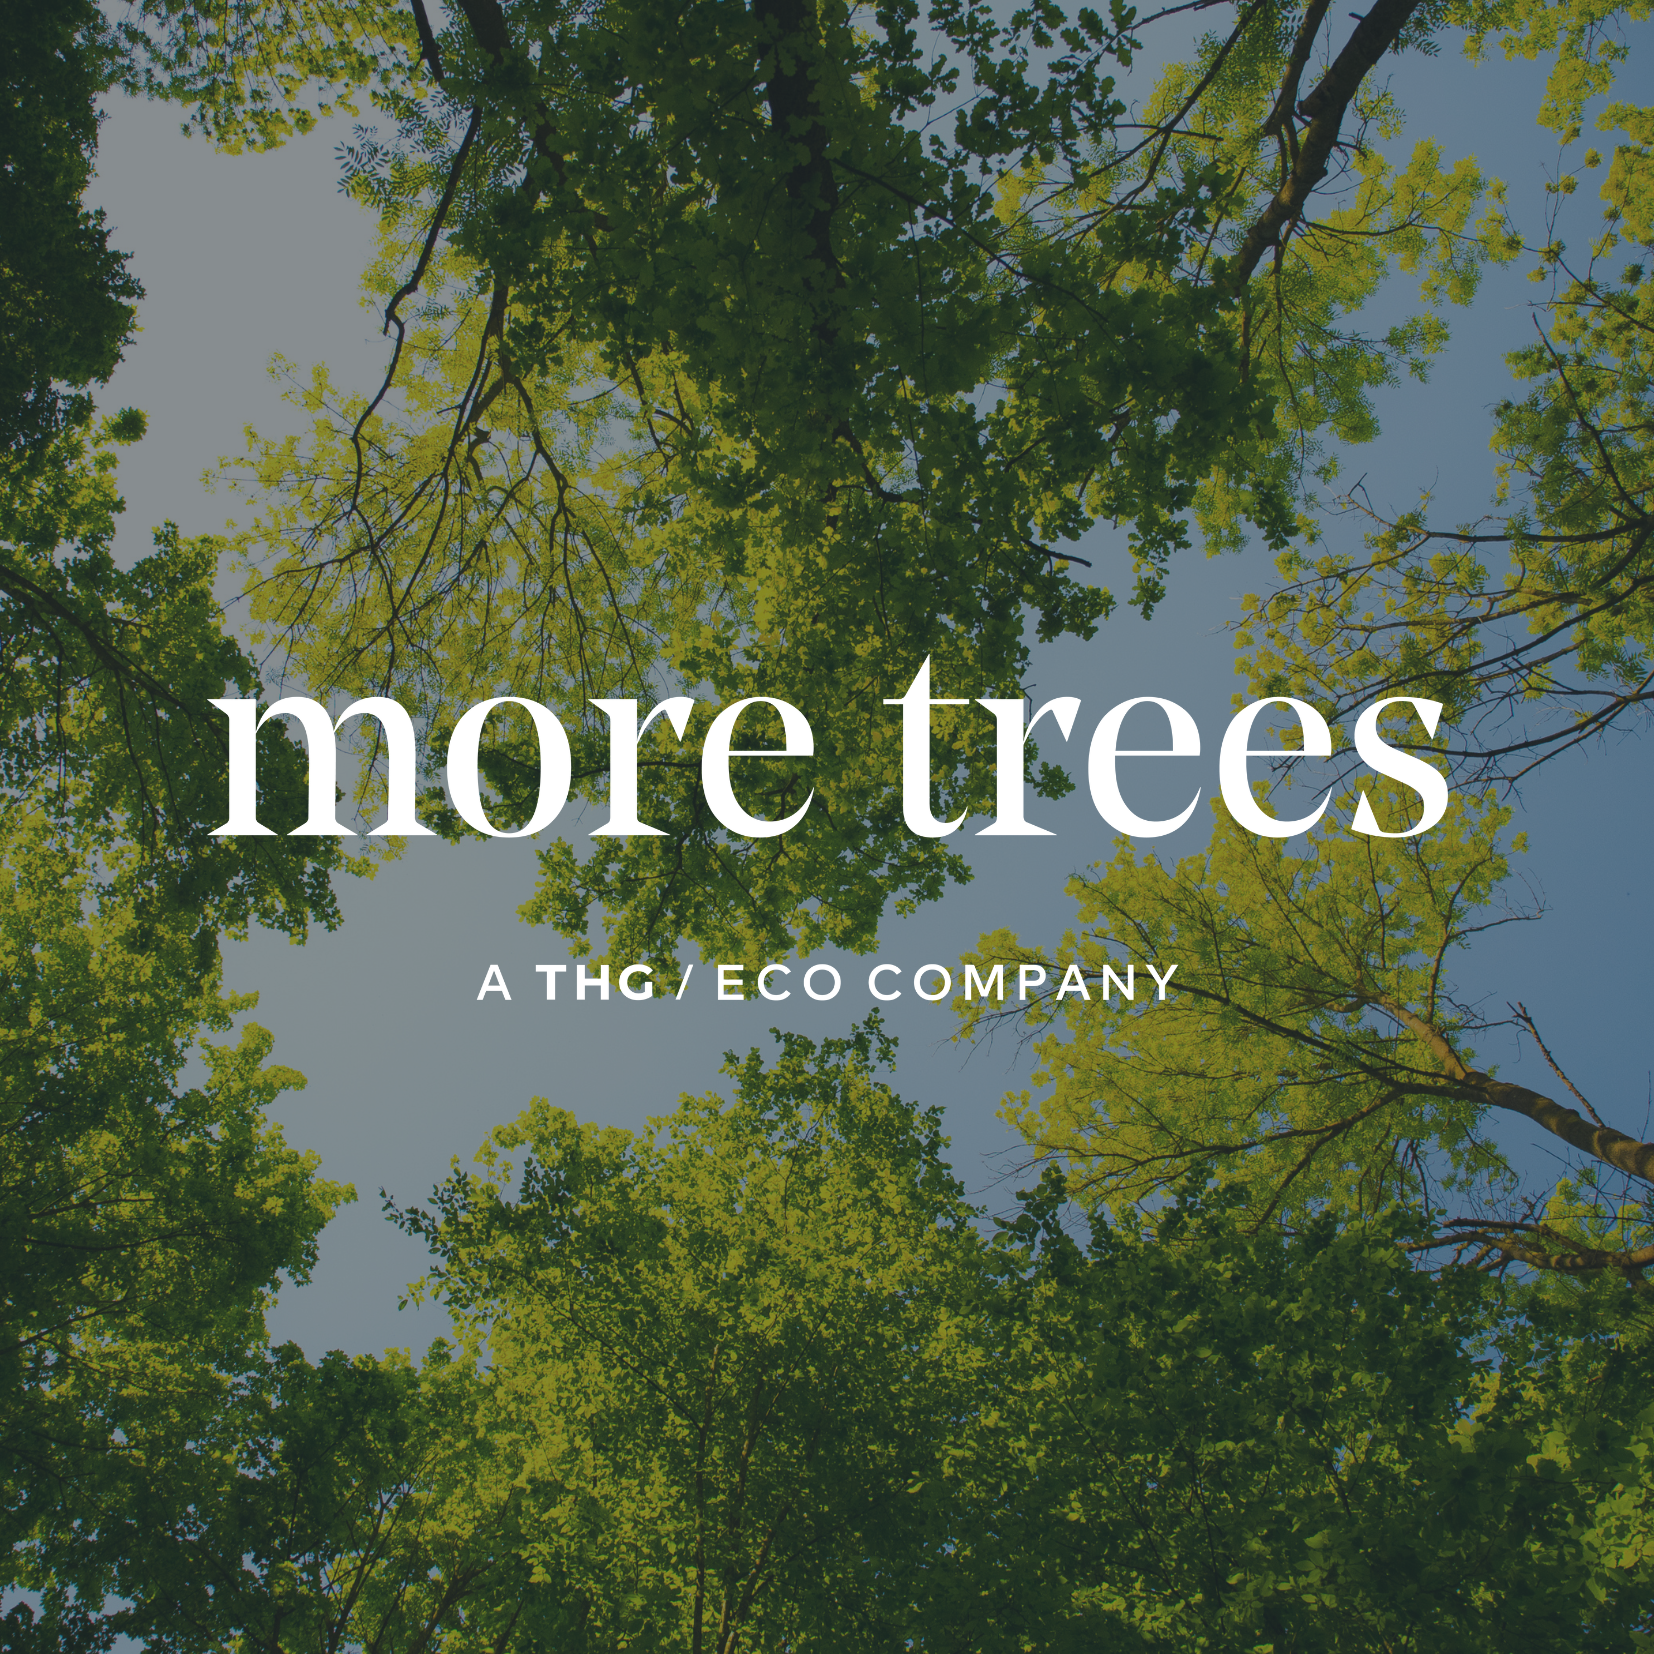 More trees logo with tree background